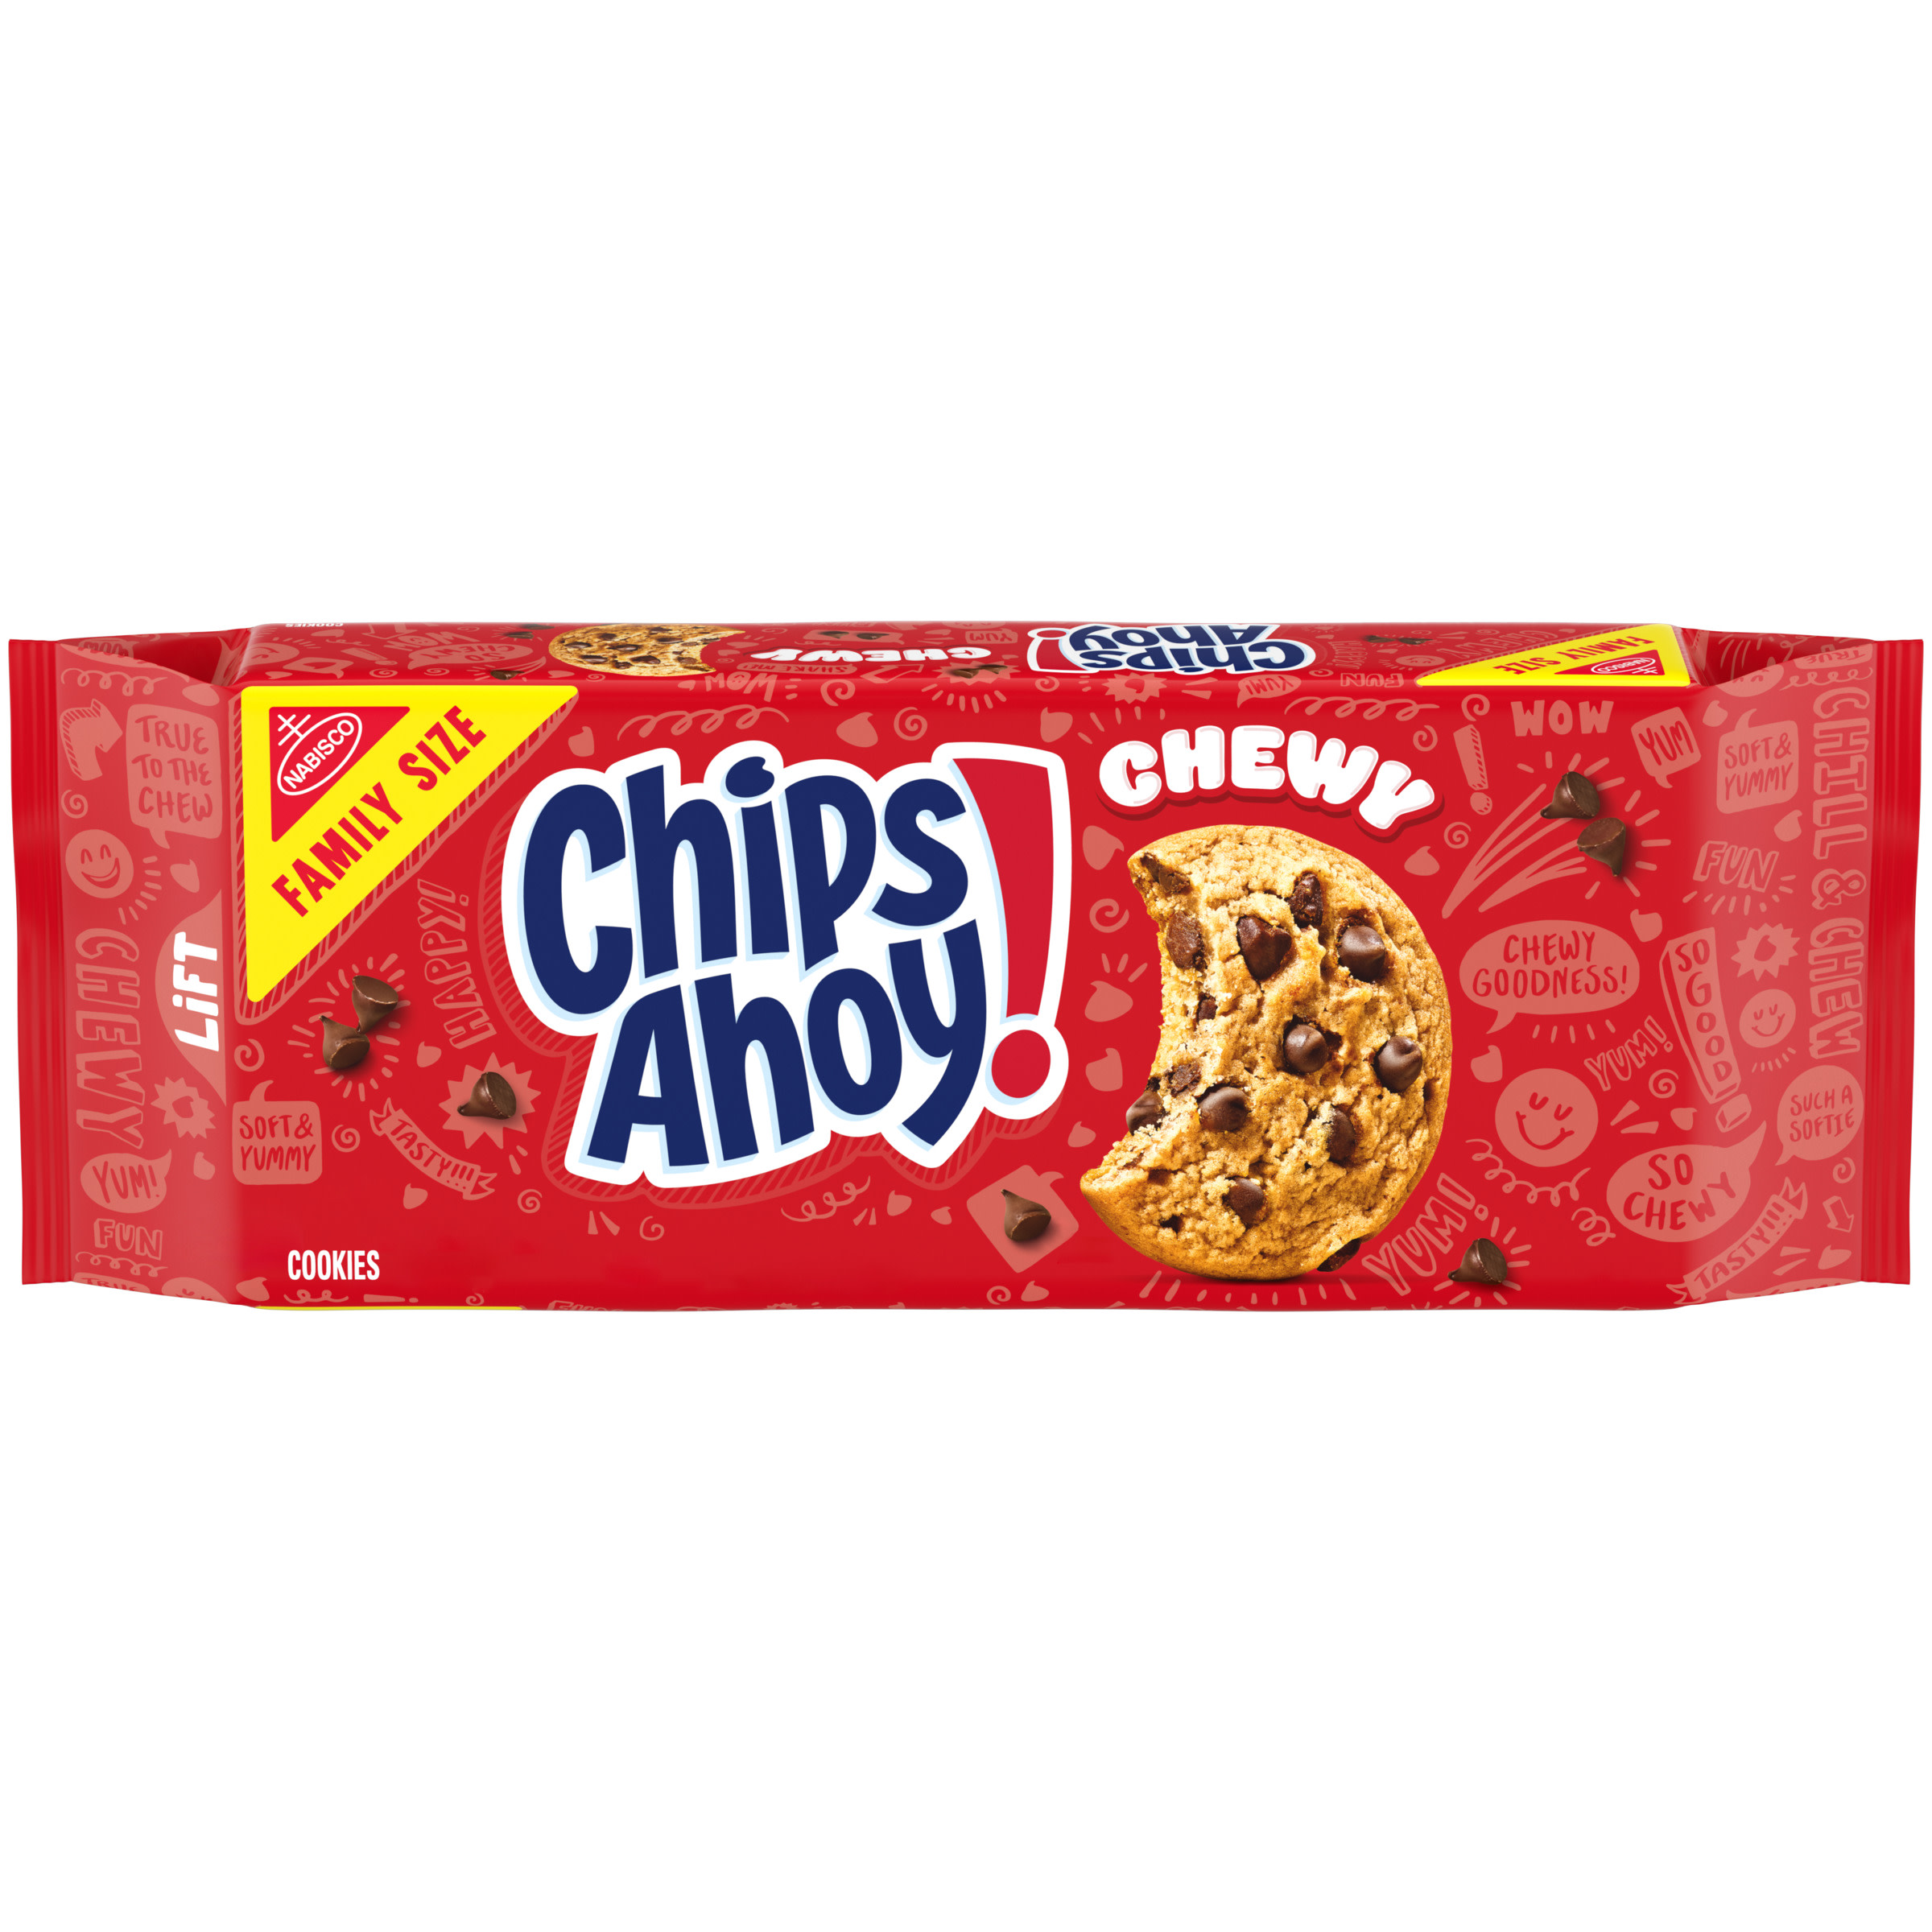 CHIPS AHOY! Chewy Chocolate Chip Cookies, Family Size, 19.5 oz - image 1 of 15